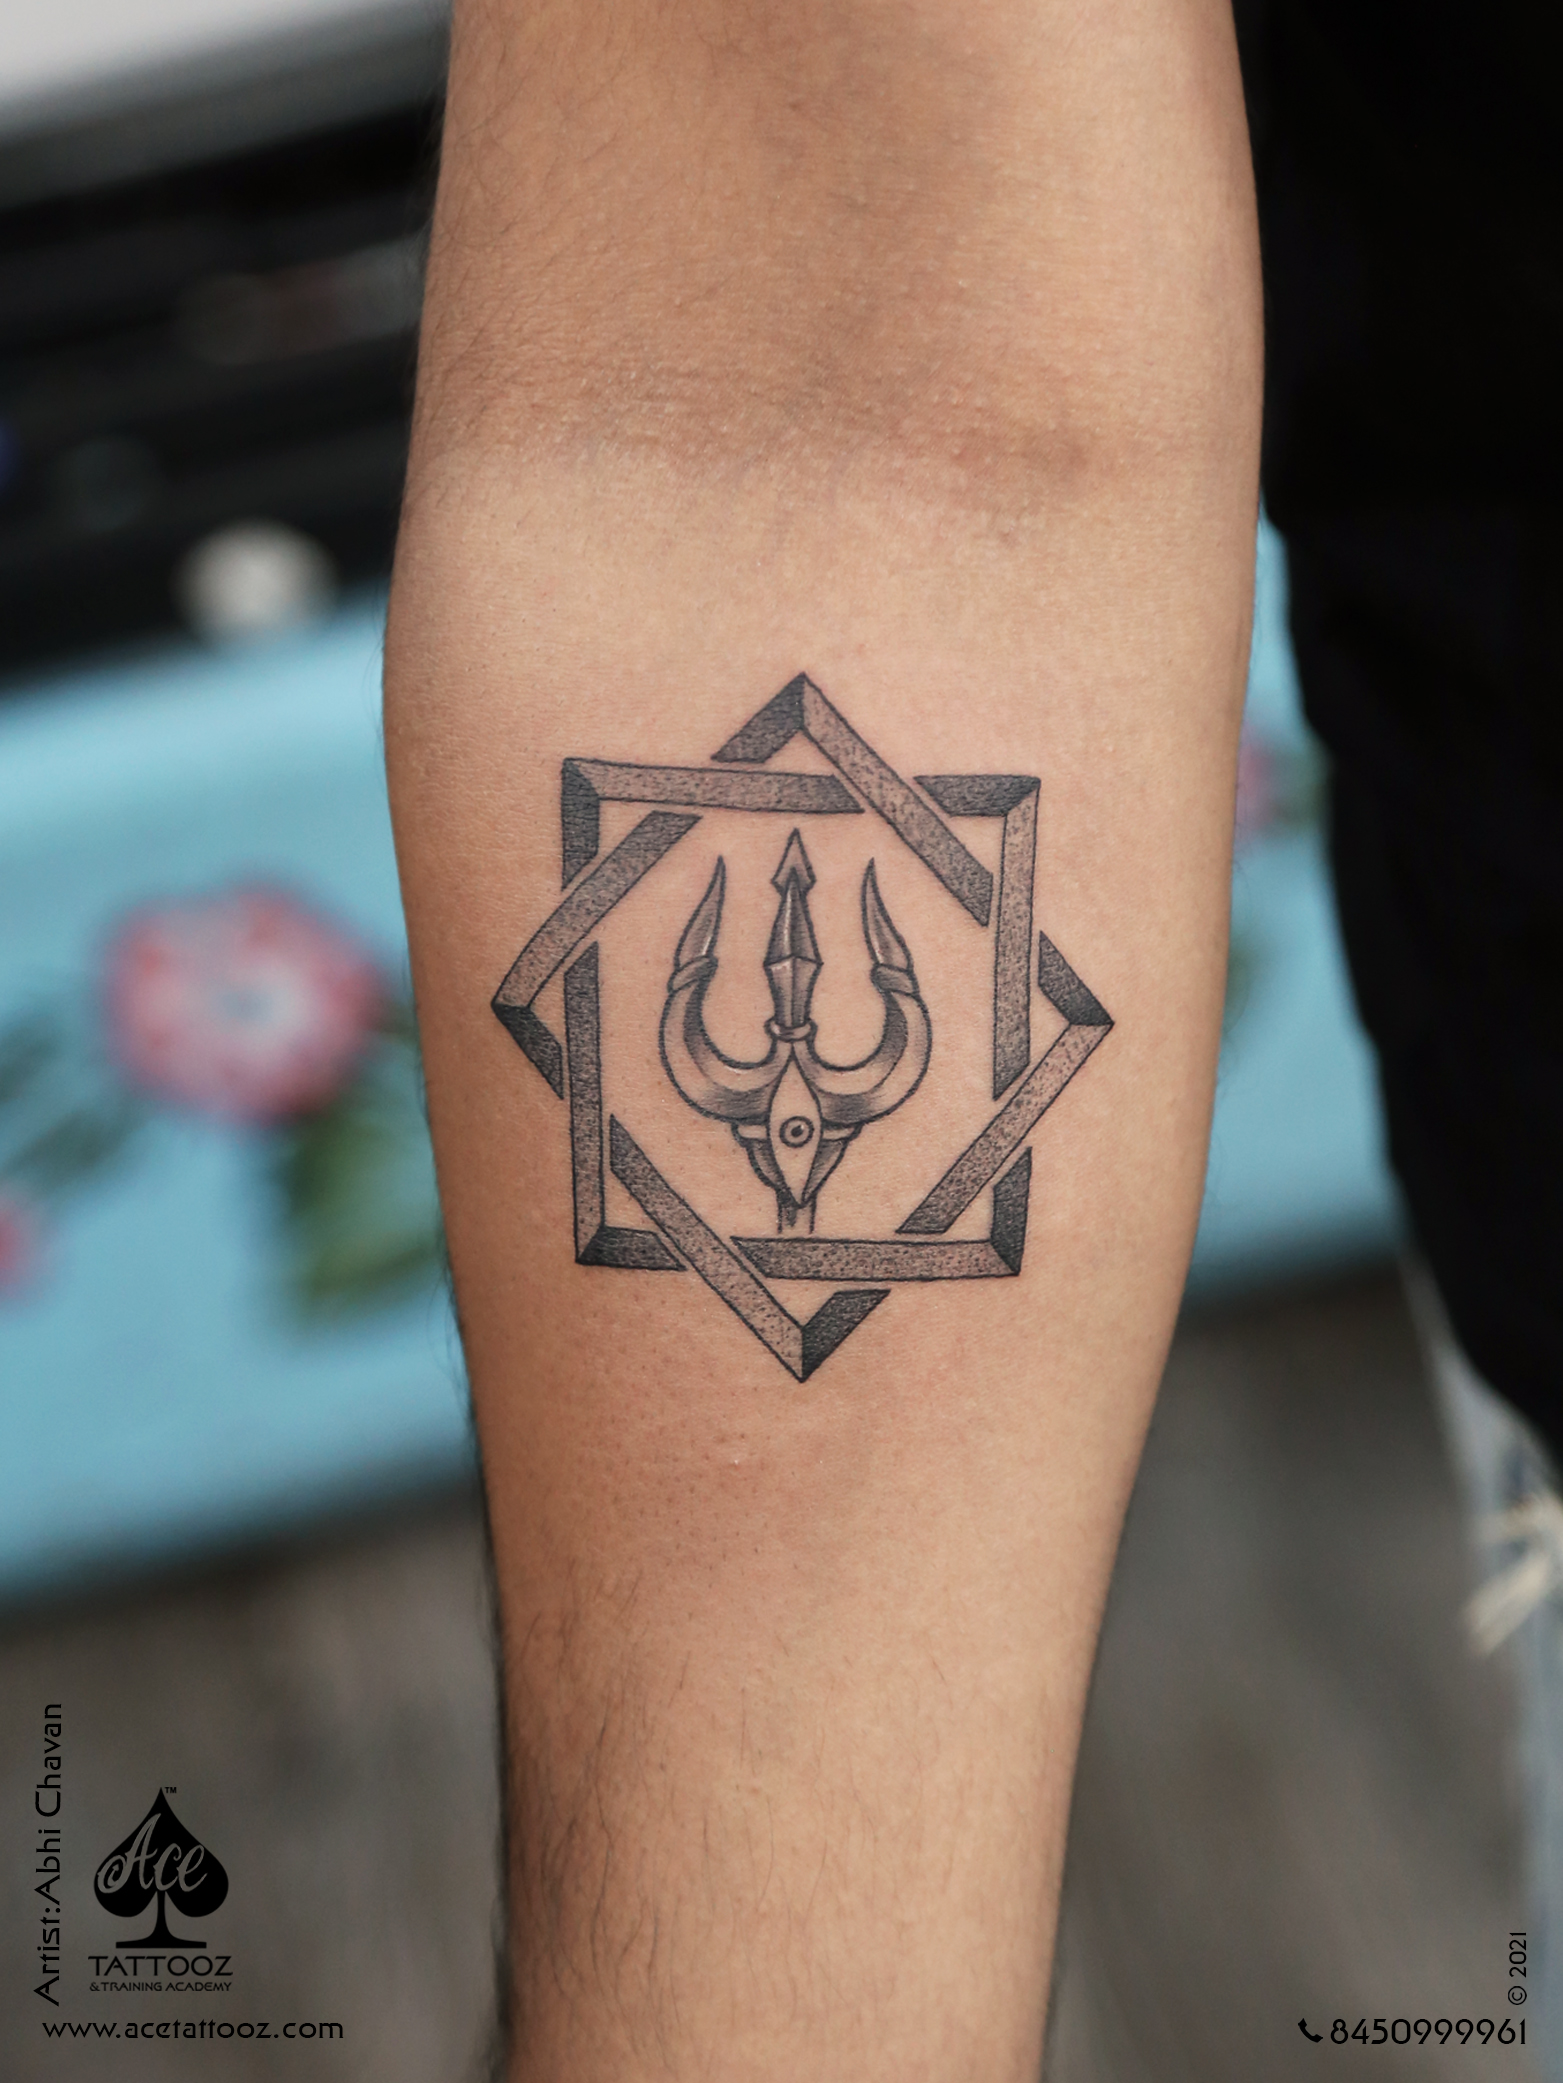 Best Sacred Geometry Tattoos in Bangalore » Eternal Expression Tattoos